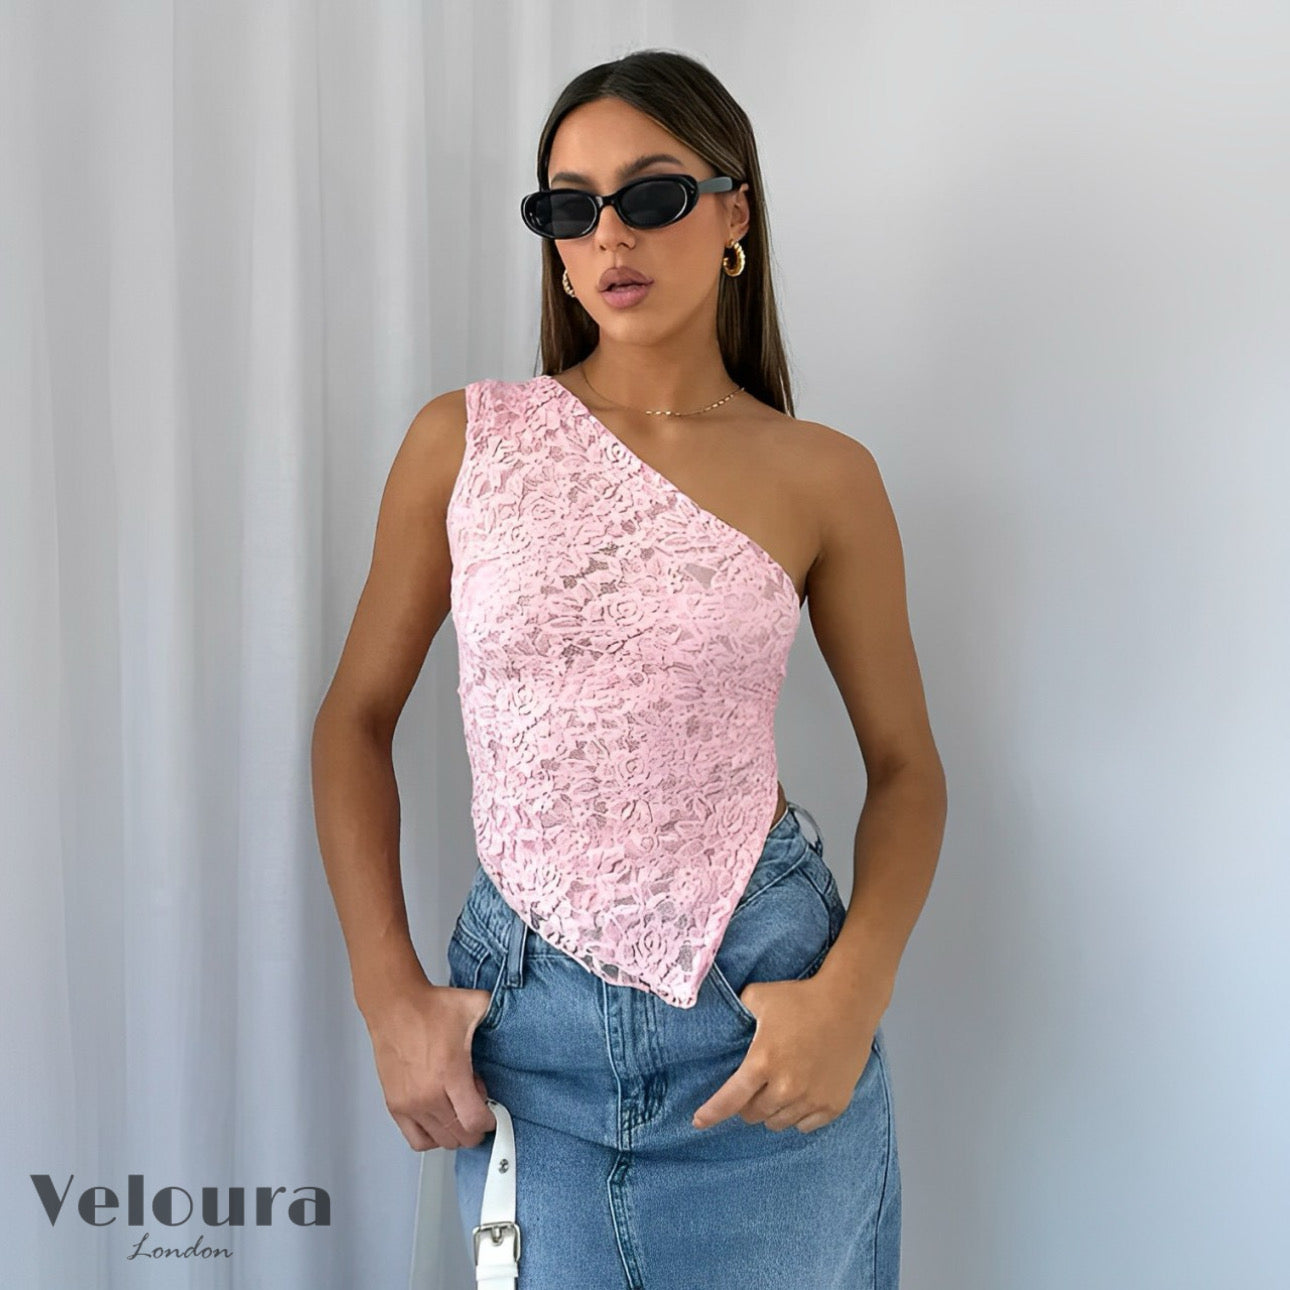 Veloura™ Floral Lace Top